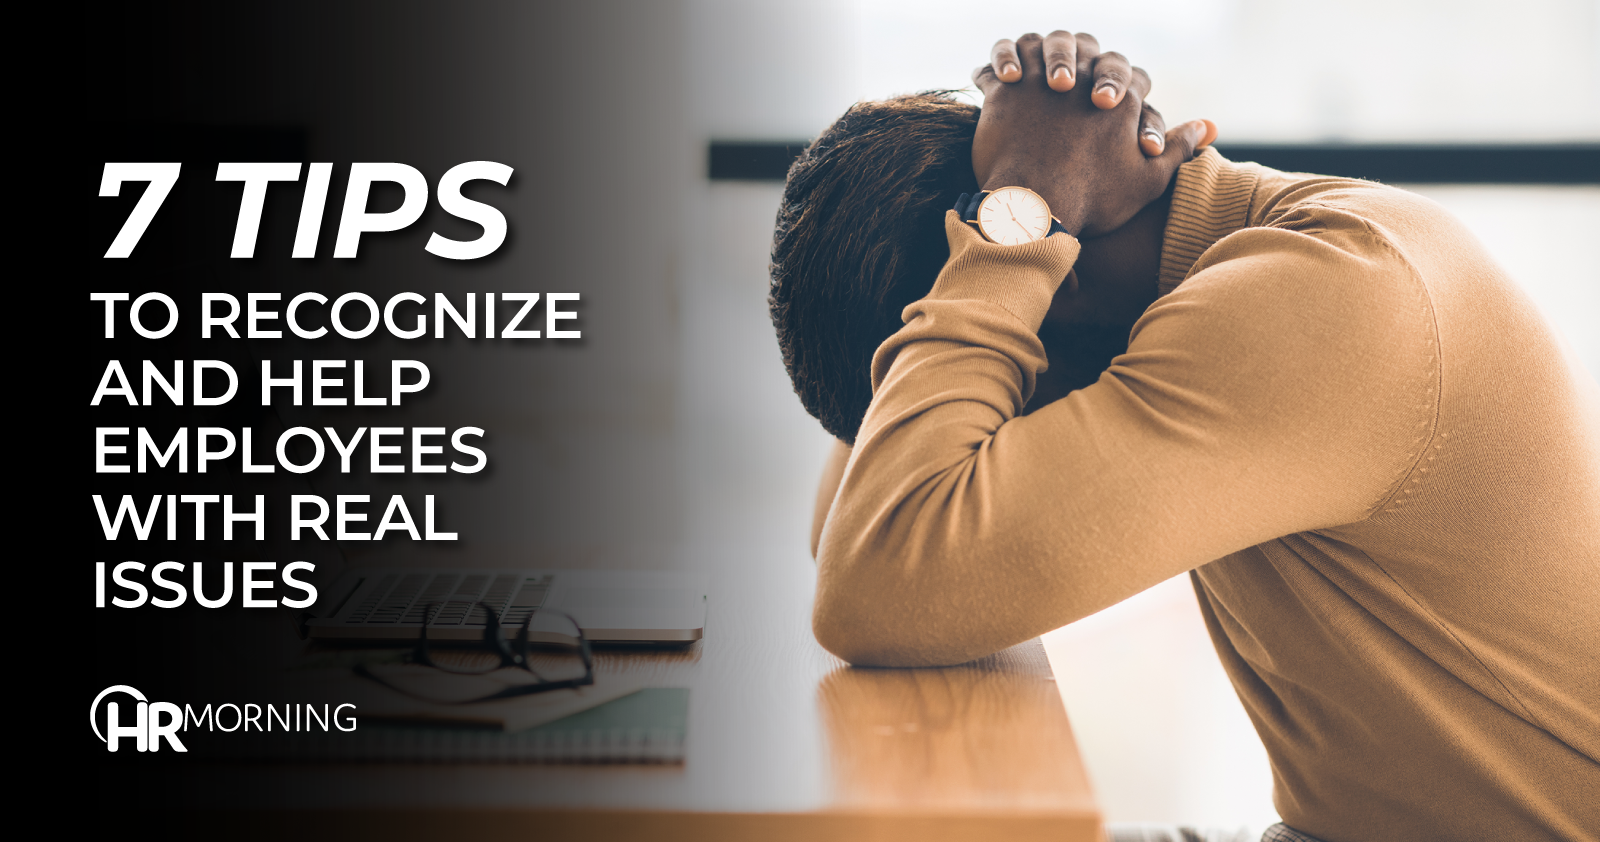 7 tips to recognize and help employees with real issues